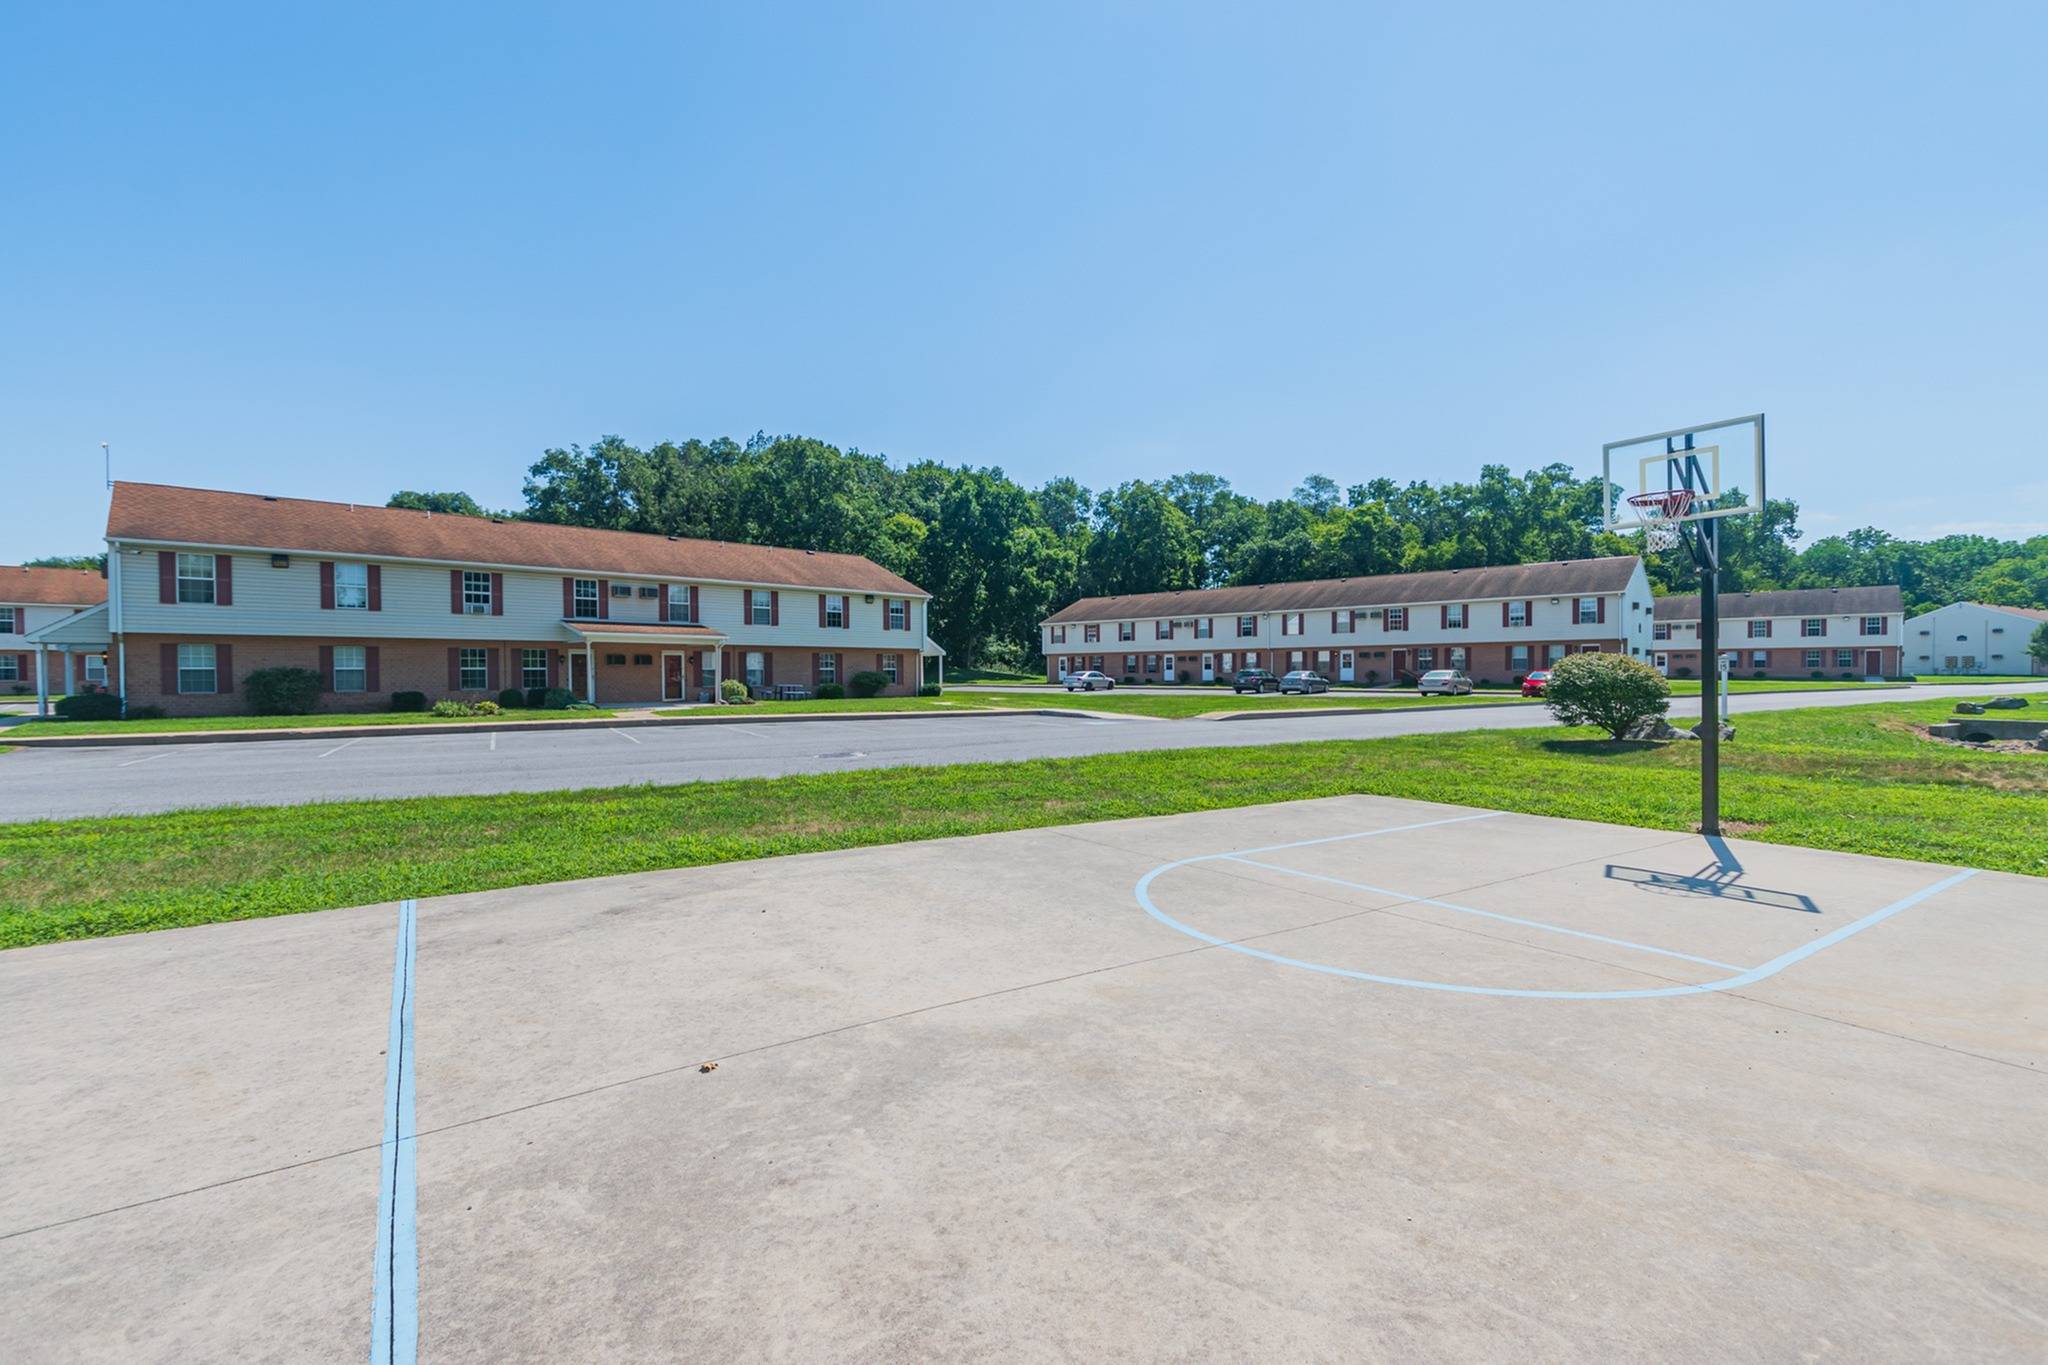 Spacious basketball court nearby the townhomes at Shippensburg Village Townhomes.